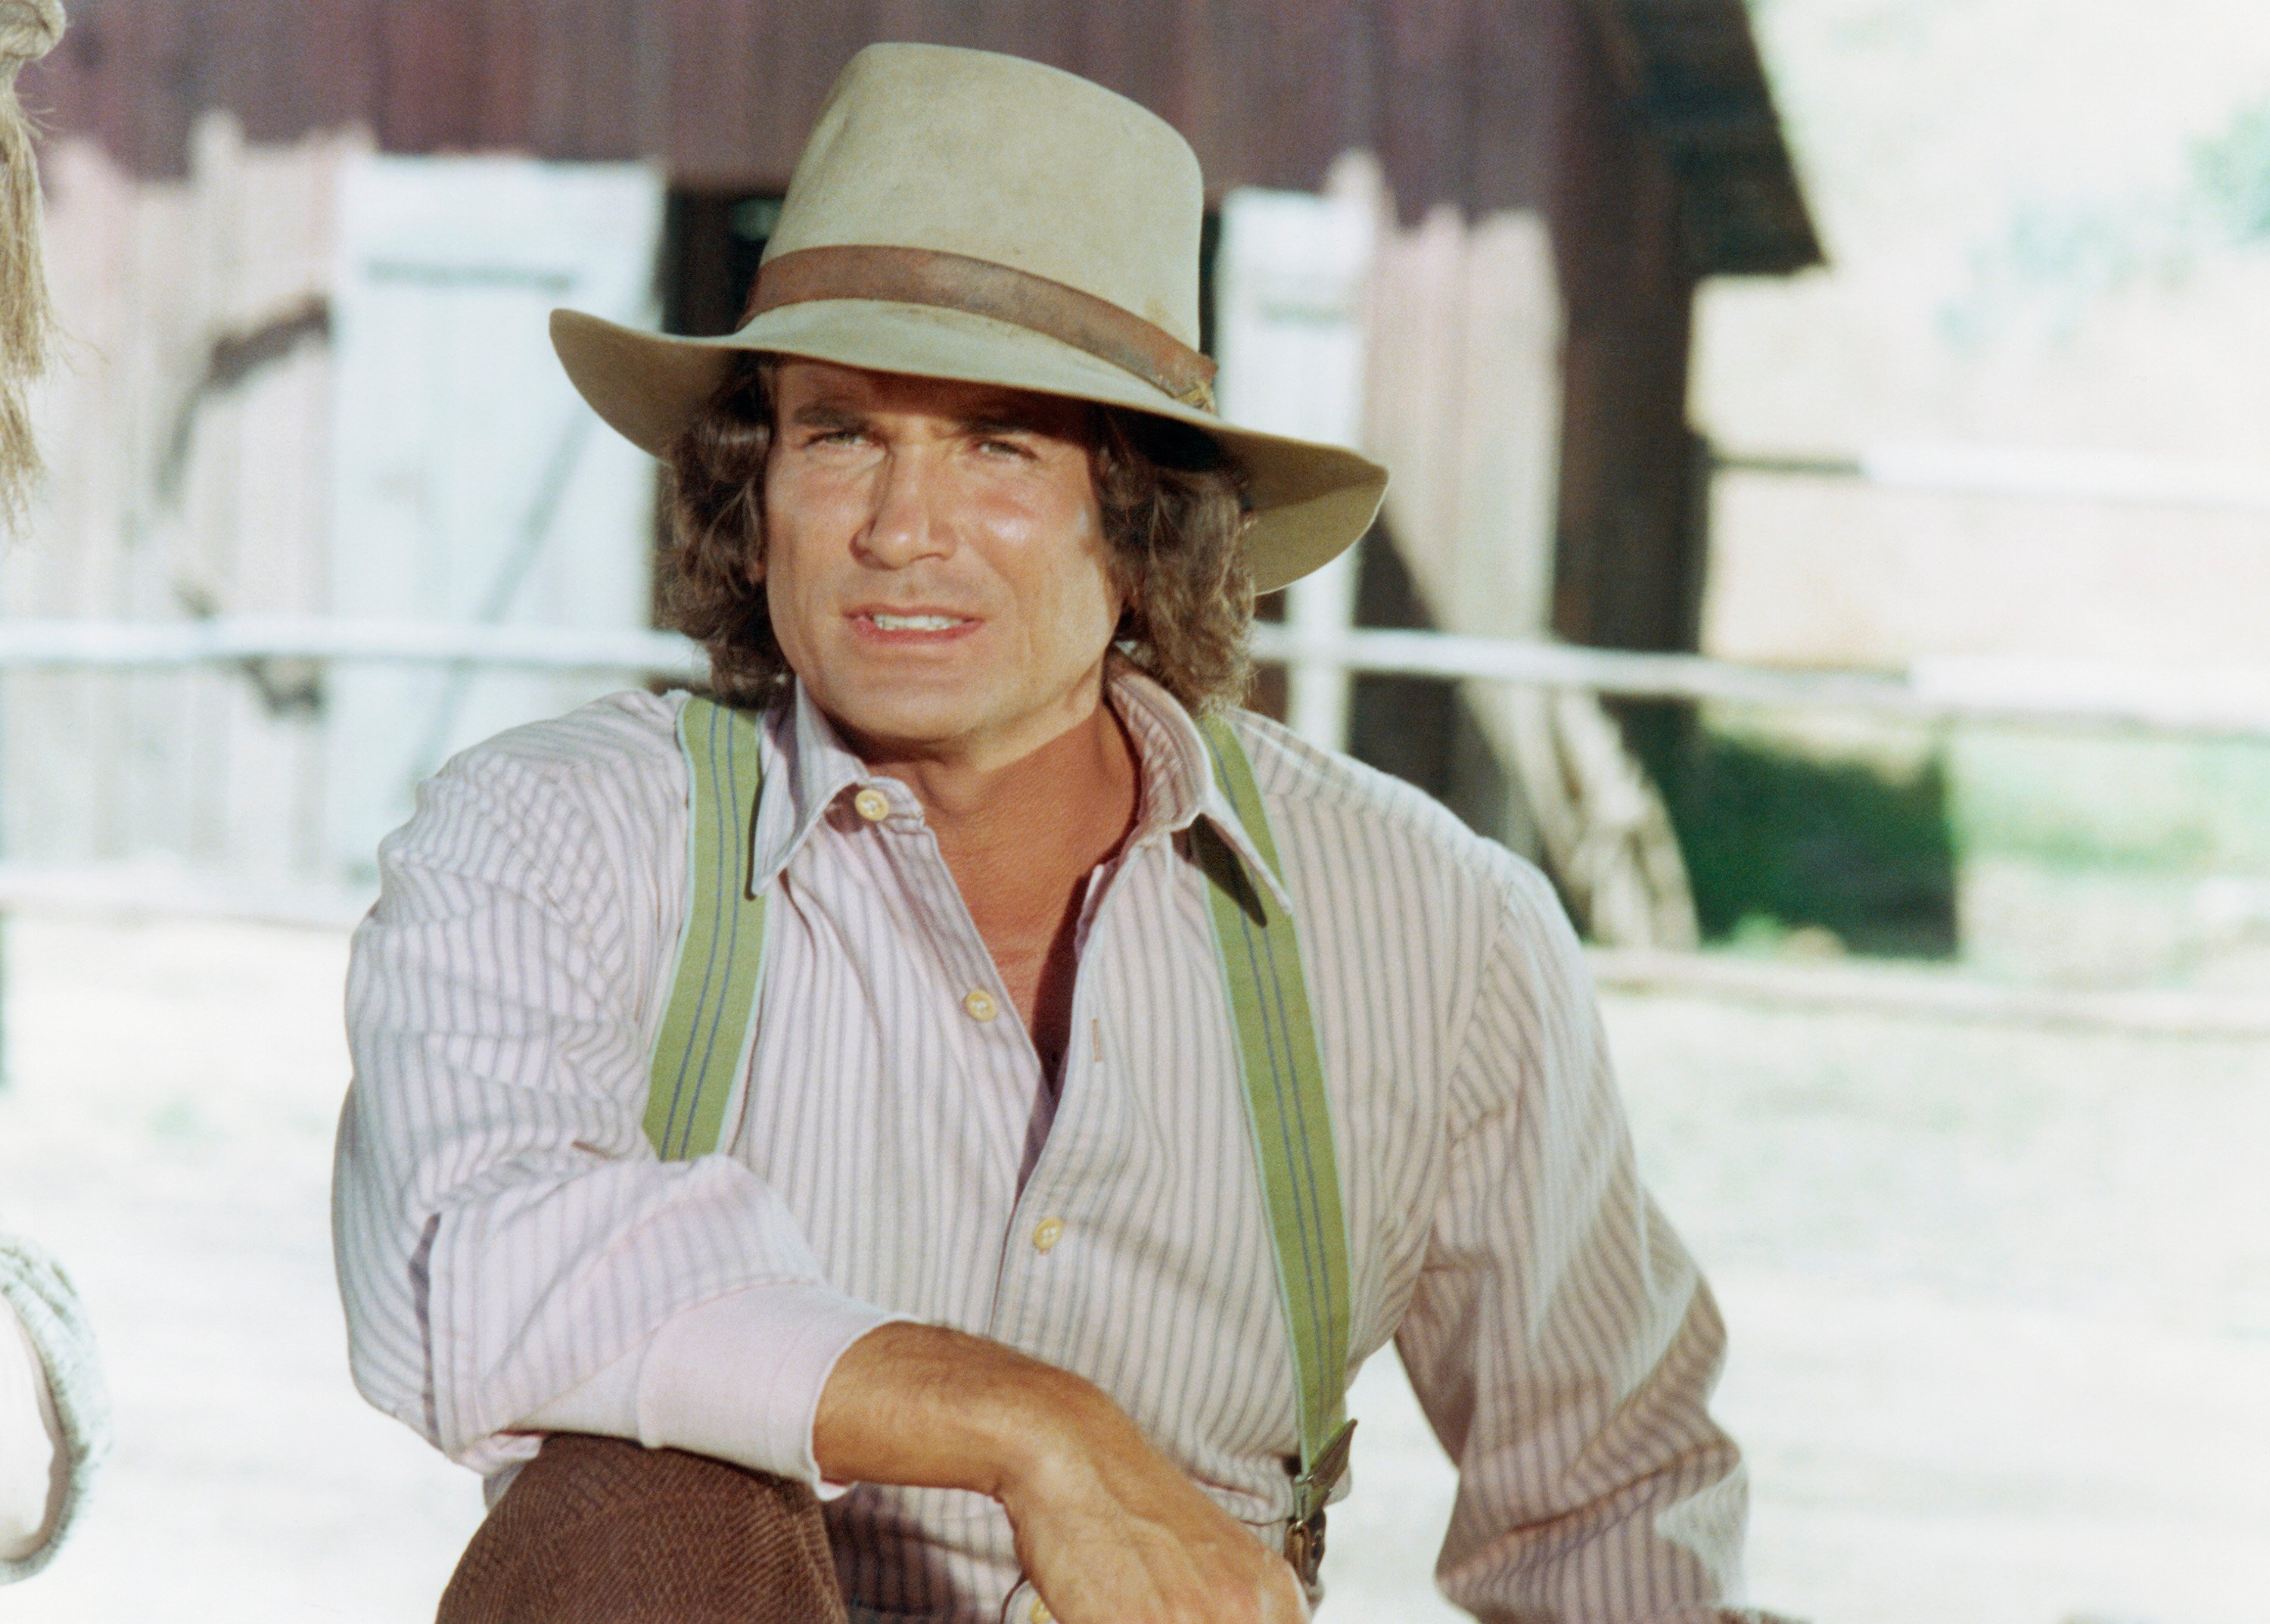 Michael Landon as Pa Ingalls, wearing a hat and suspenders, in 'Little House on the Prairie'